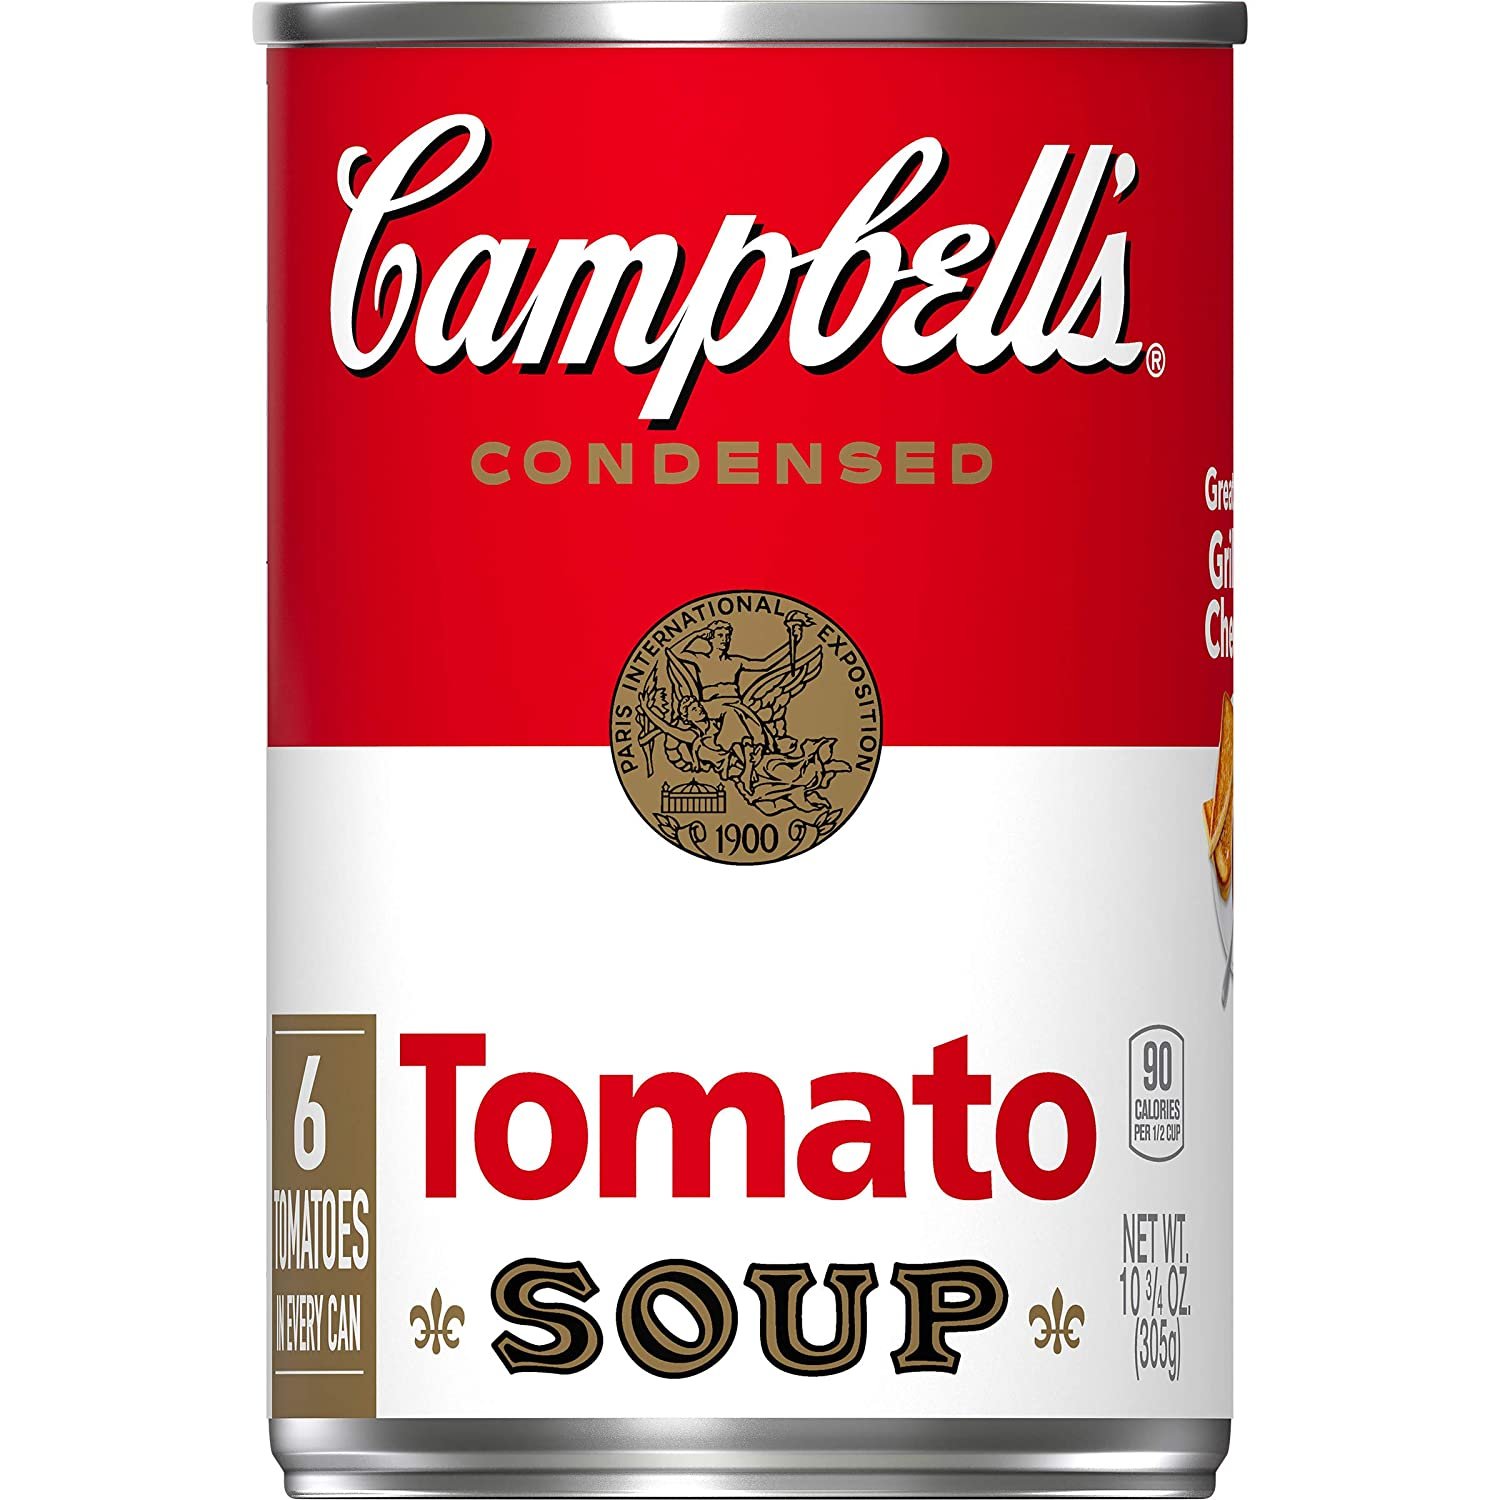 can you buy five of tomato soup from the supermarket